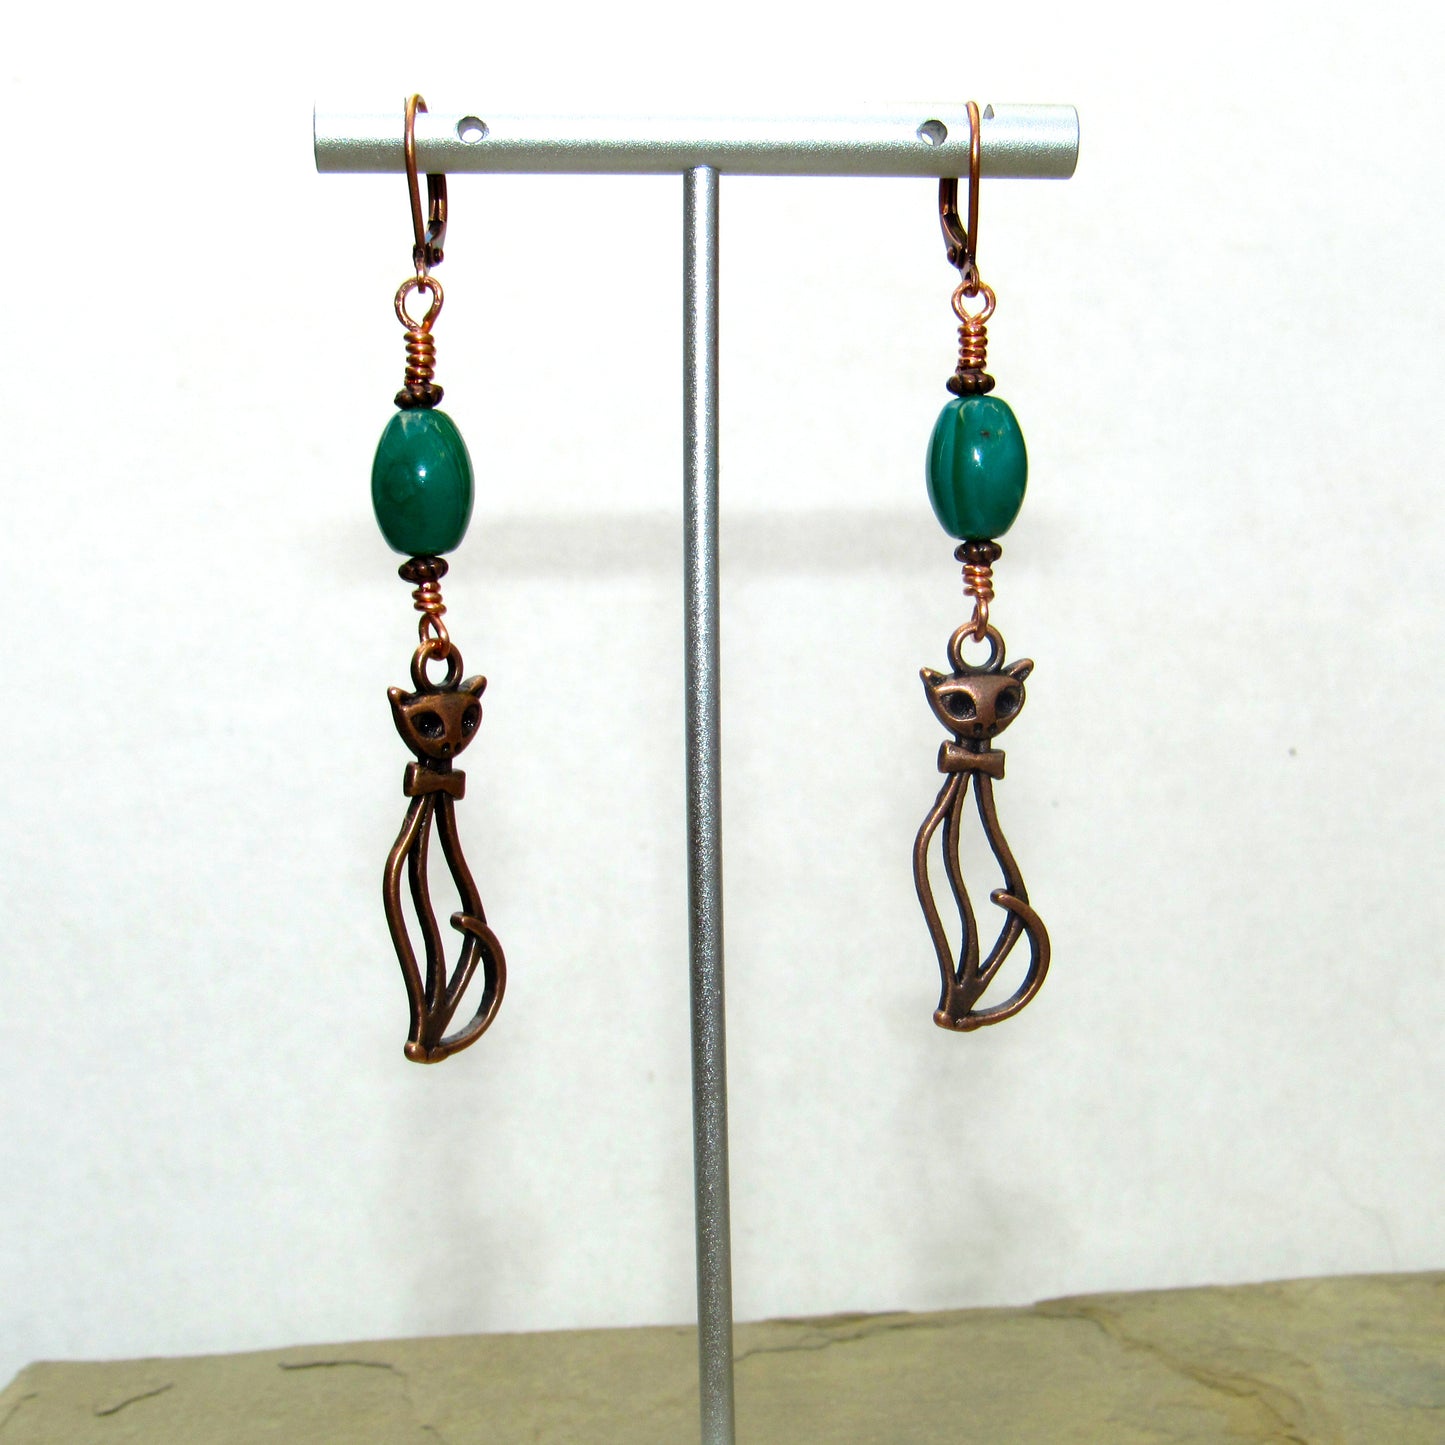 Green Agate gemstone and Copper Kitty Cat Drop Earrings